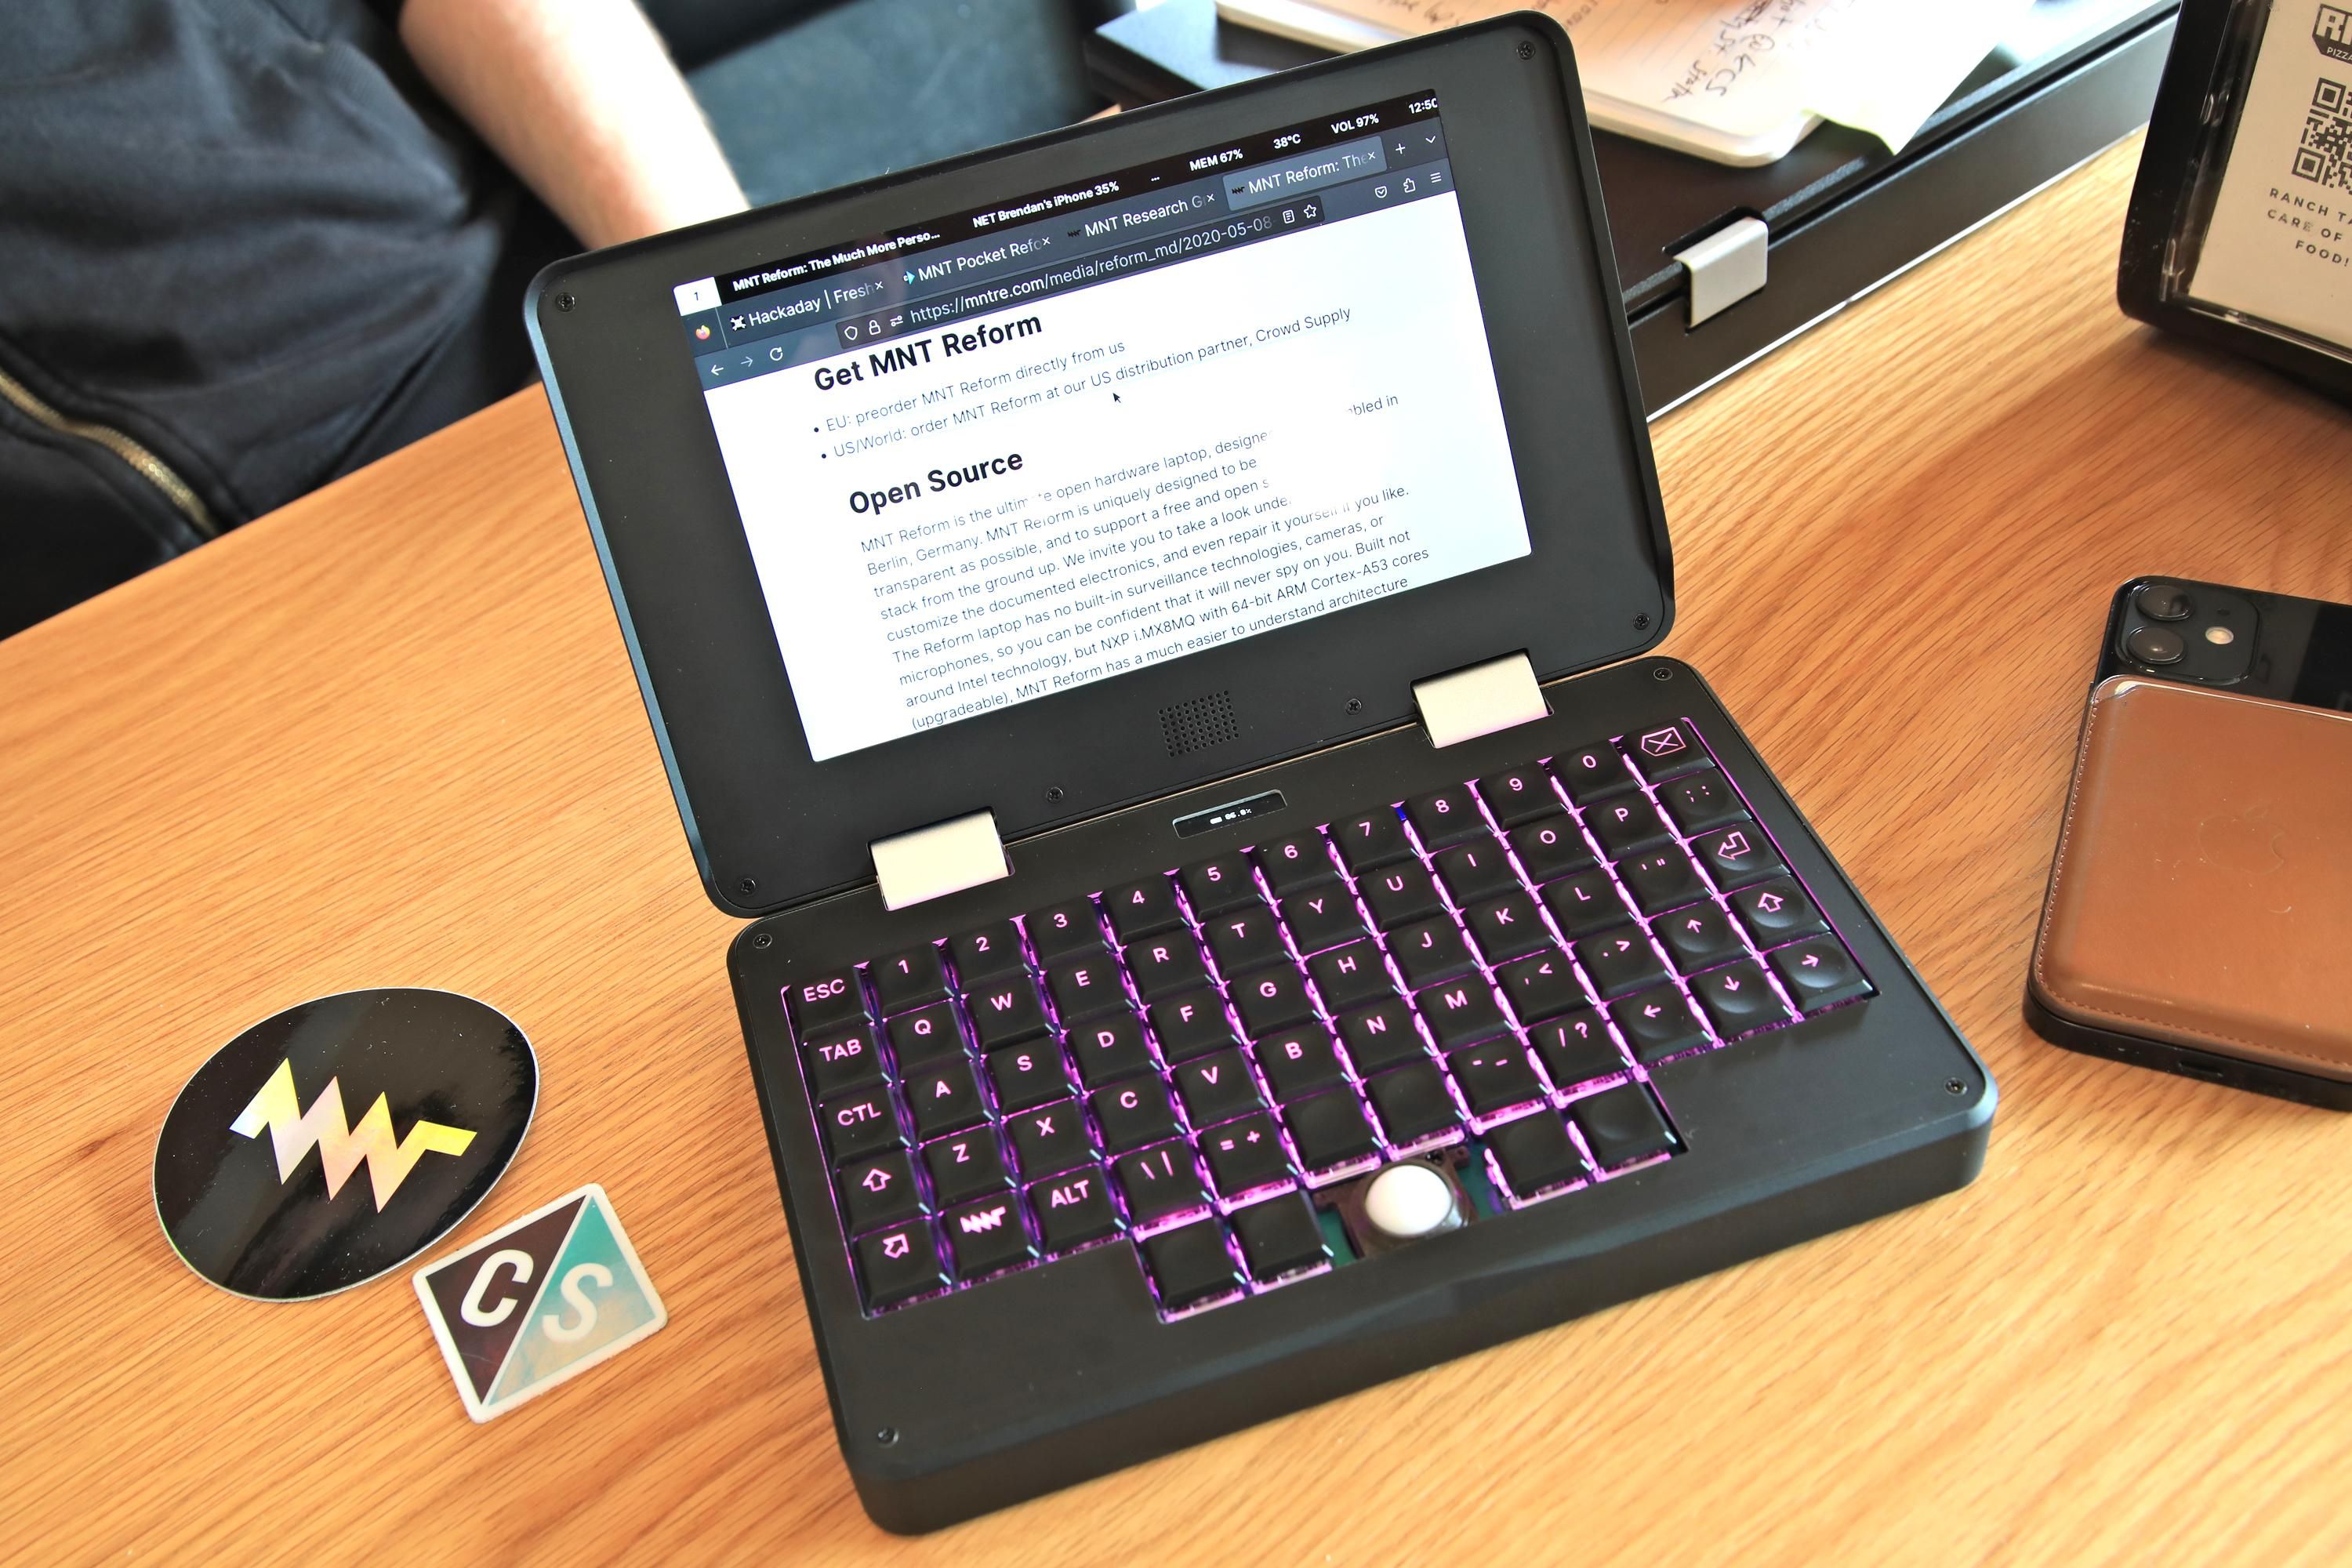 MNT's Pocket Reform modular mini laptop coming soon with ARM-based  processor options and a 7-inch display -  News